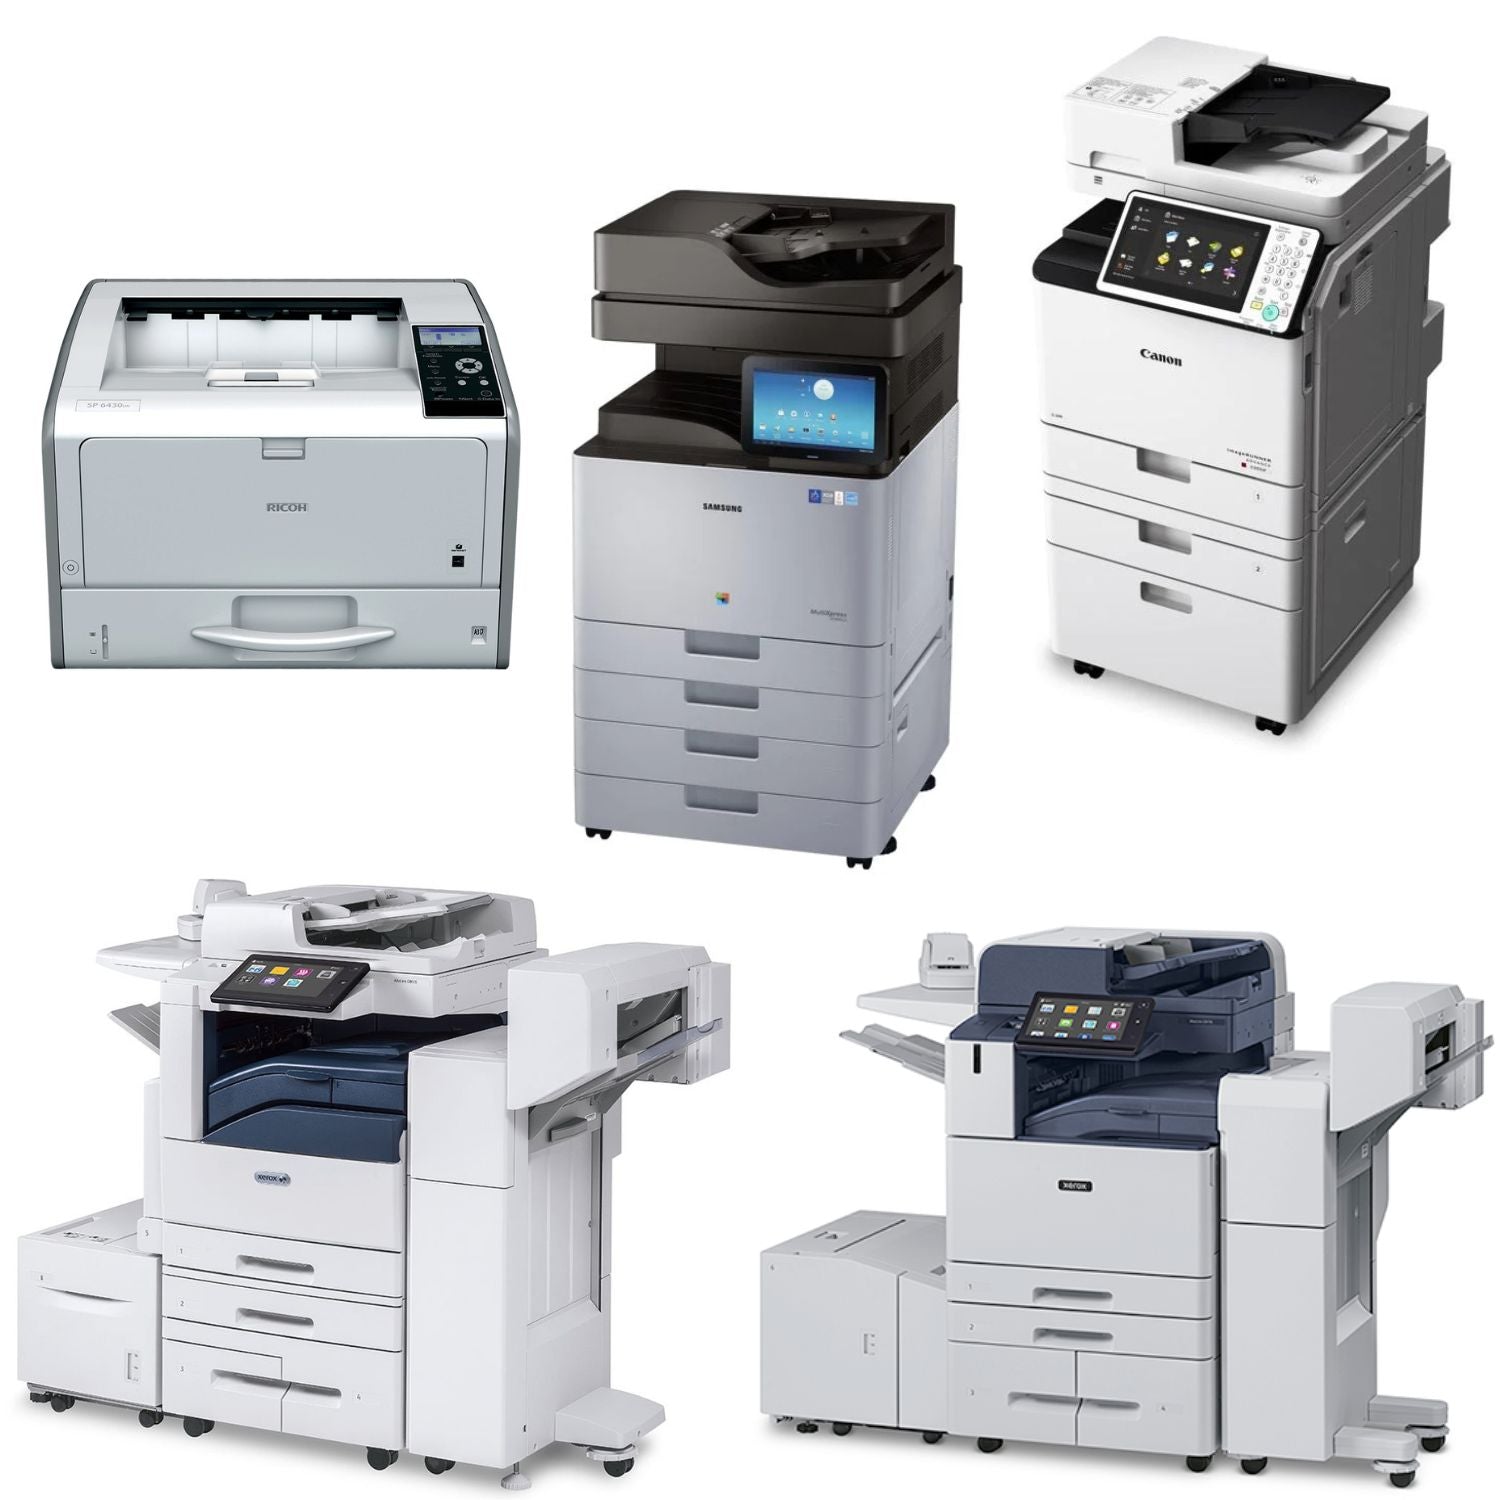 The Top 5 11x17 Printers for Commercial Printing